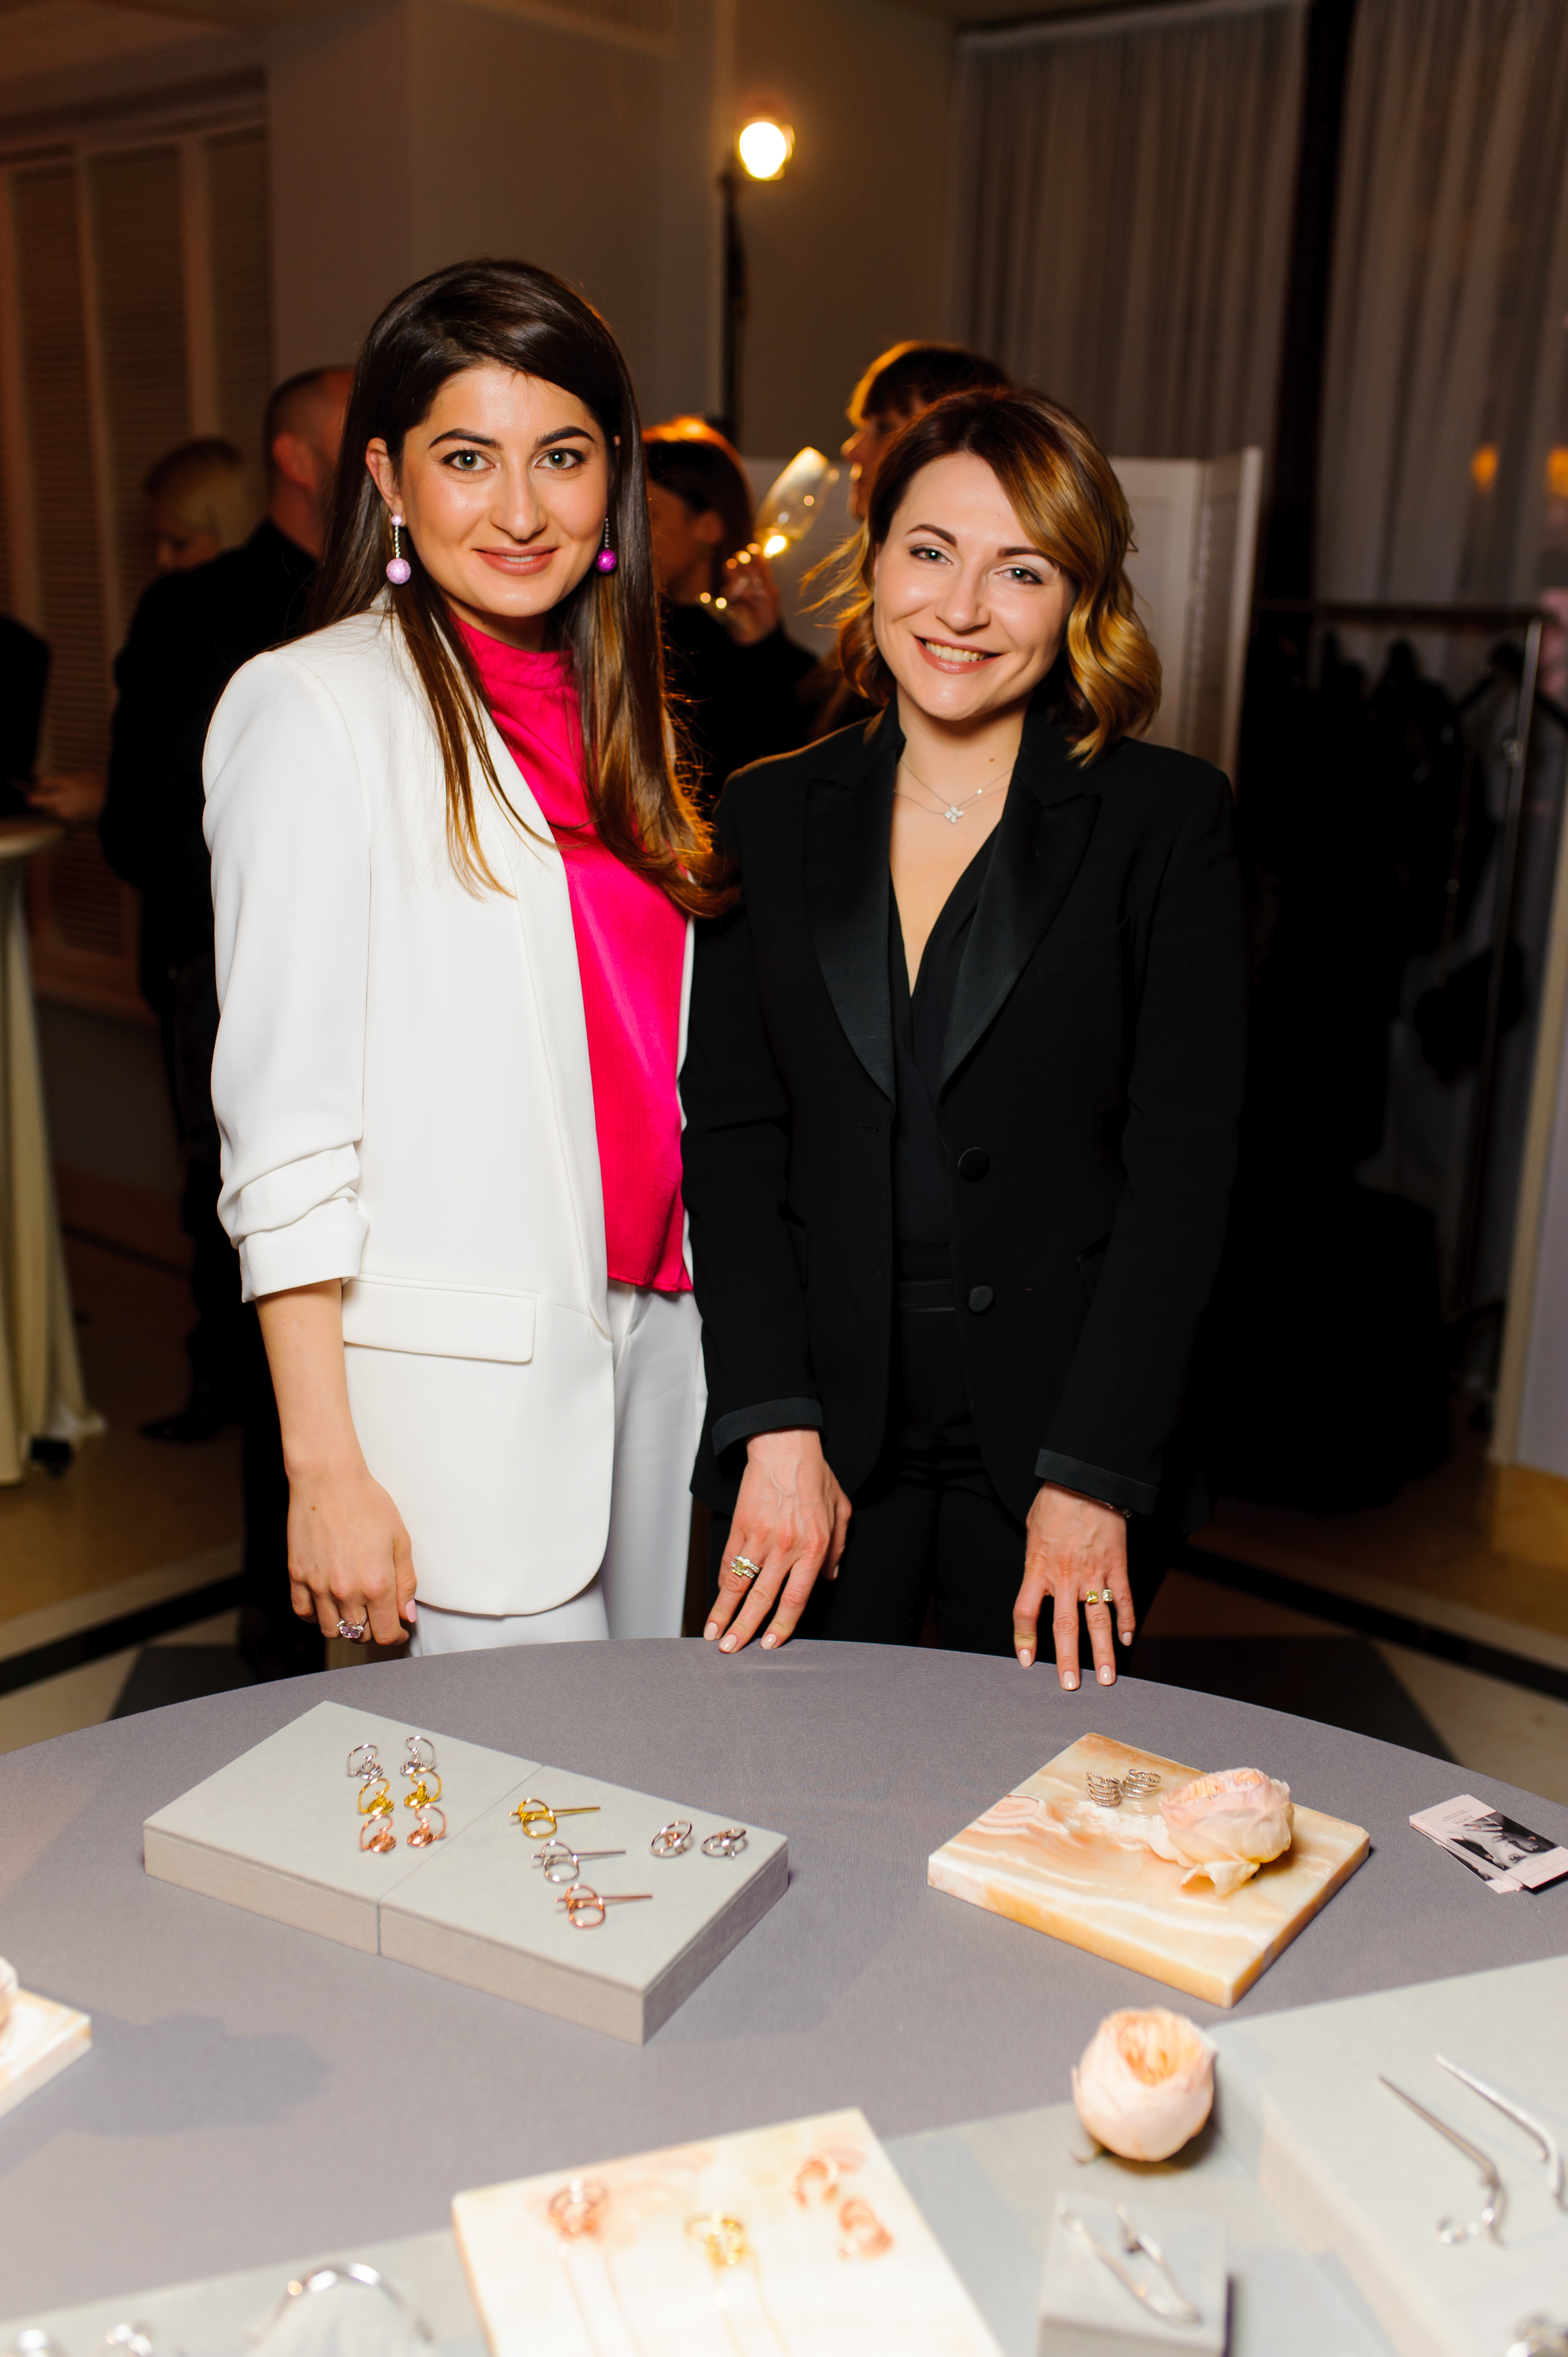 Anna Andres Jewelry press launch